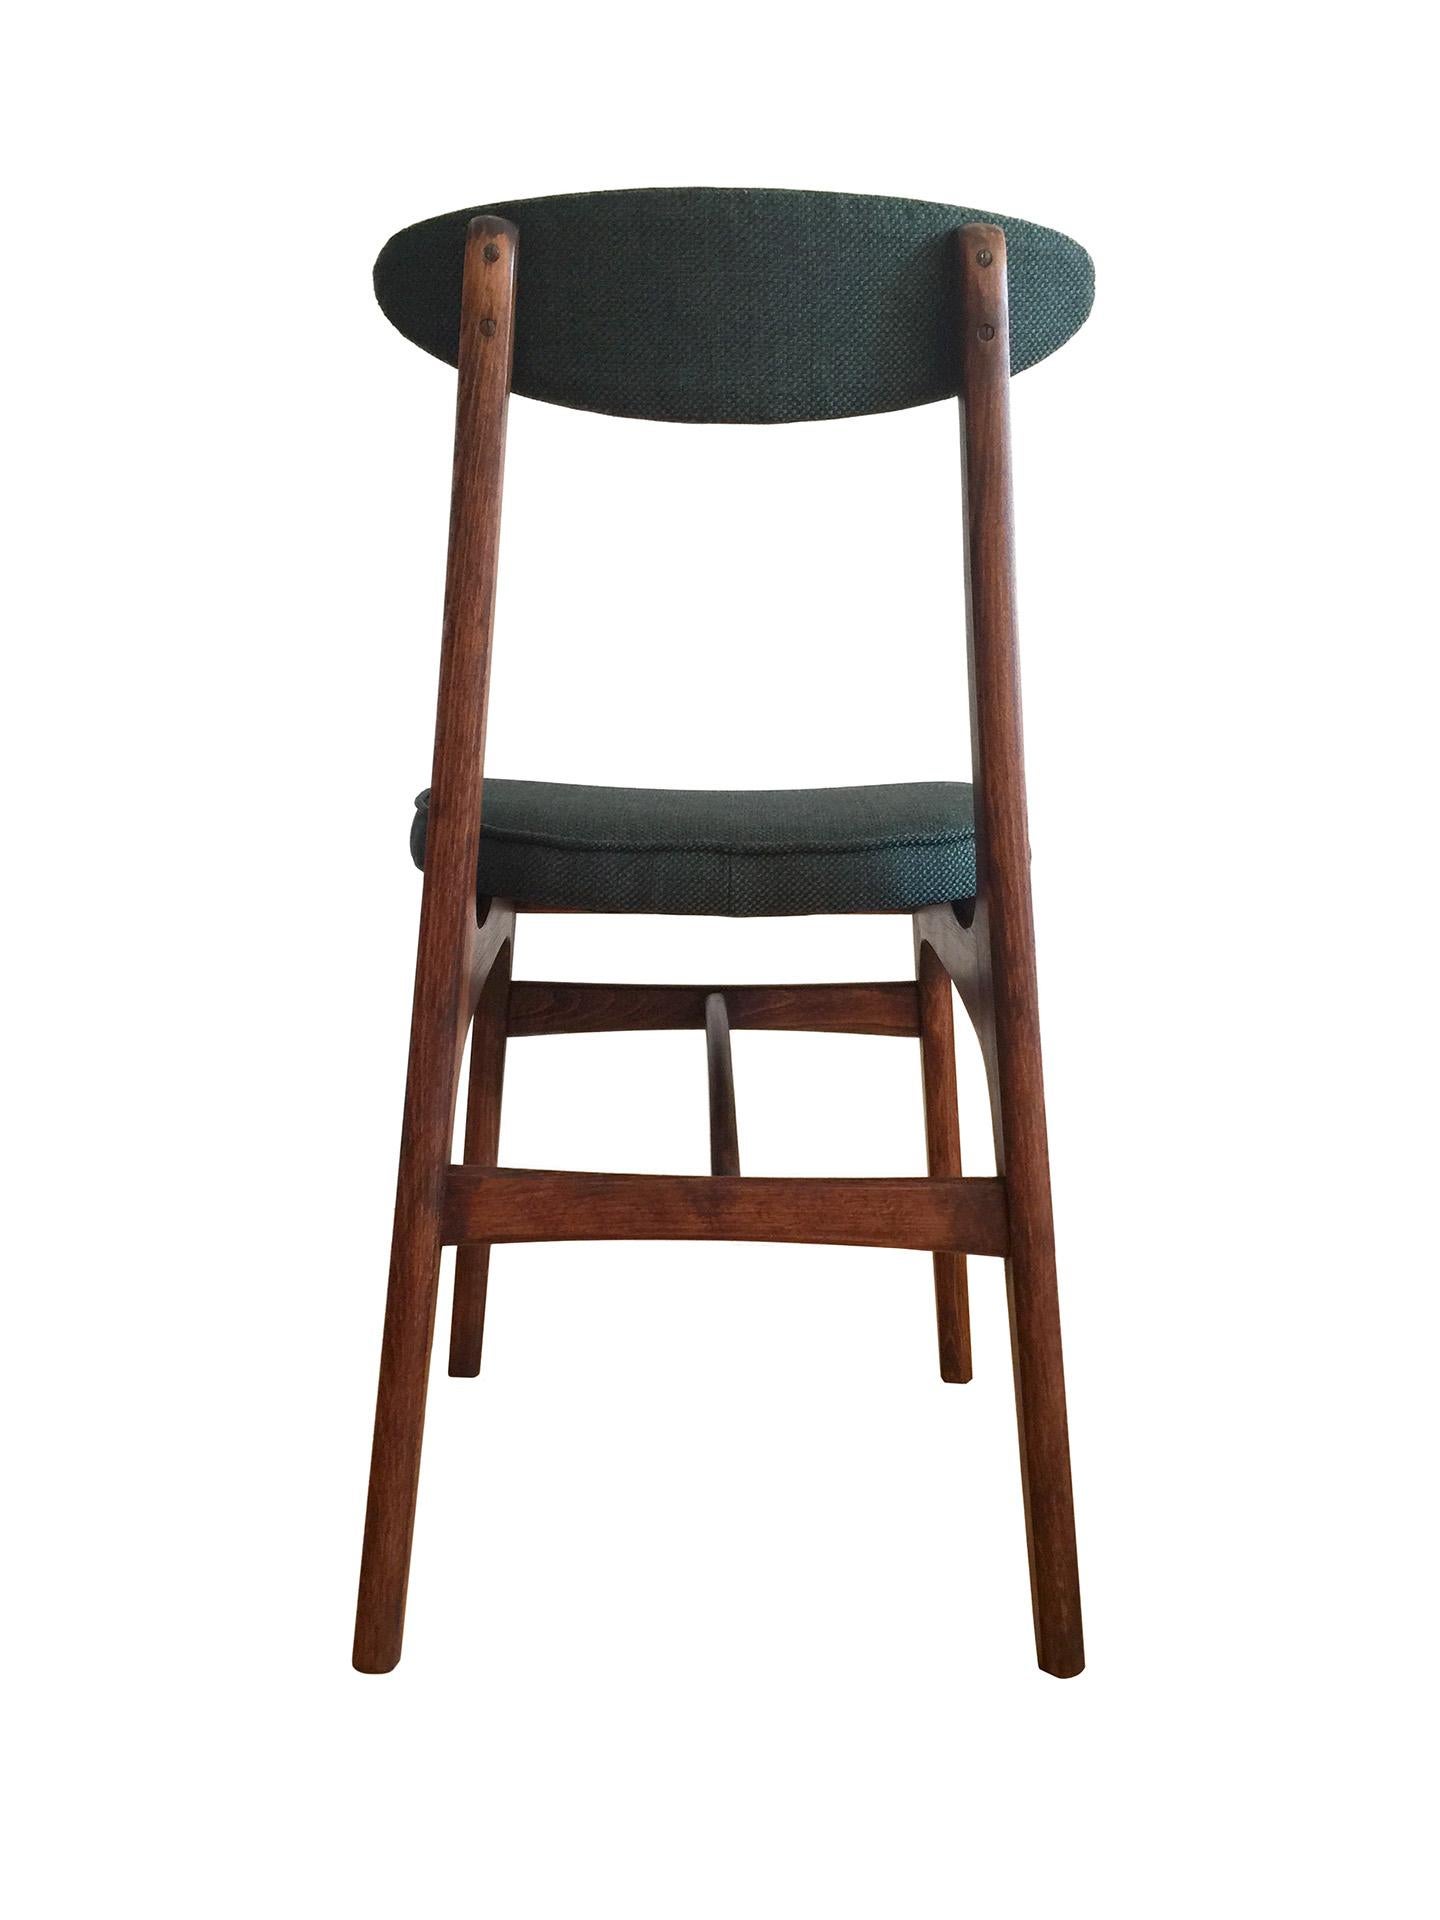 Polish Midcentury Dining Chairs by Rajmund Halas in Green, 1960s, Set of 3 For Sale